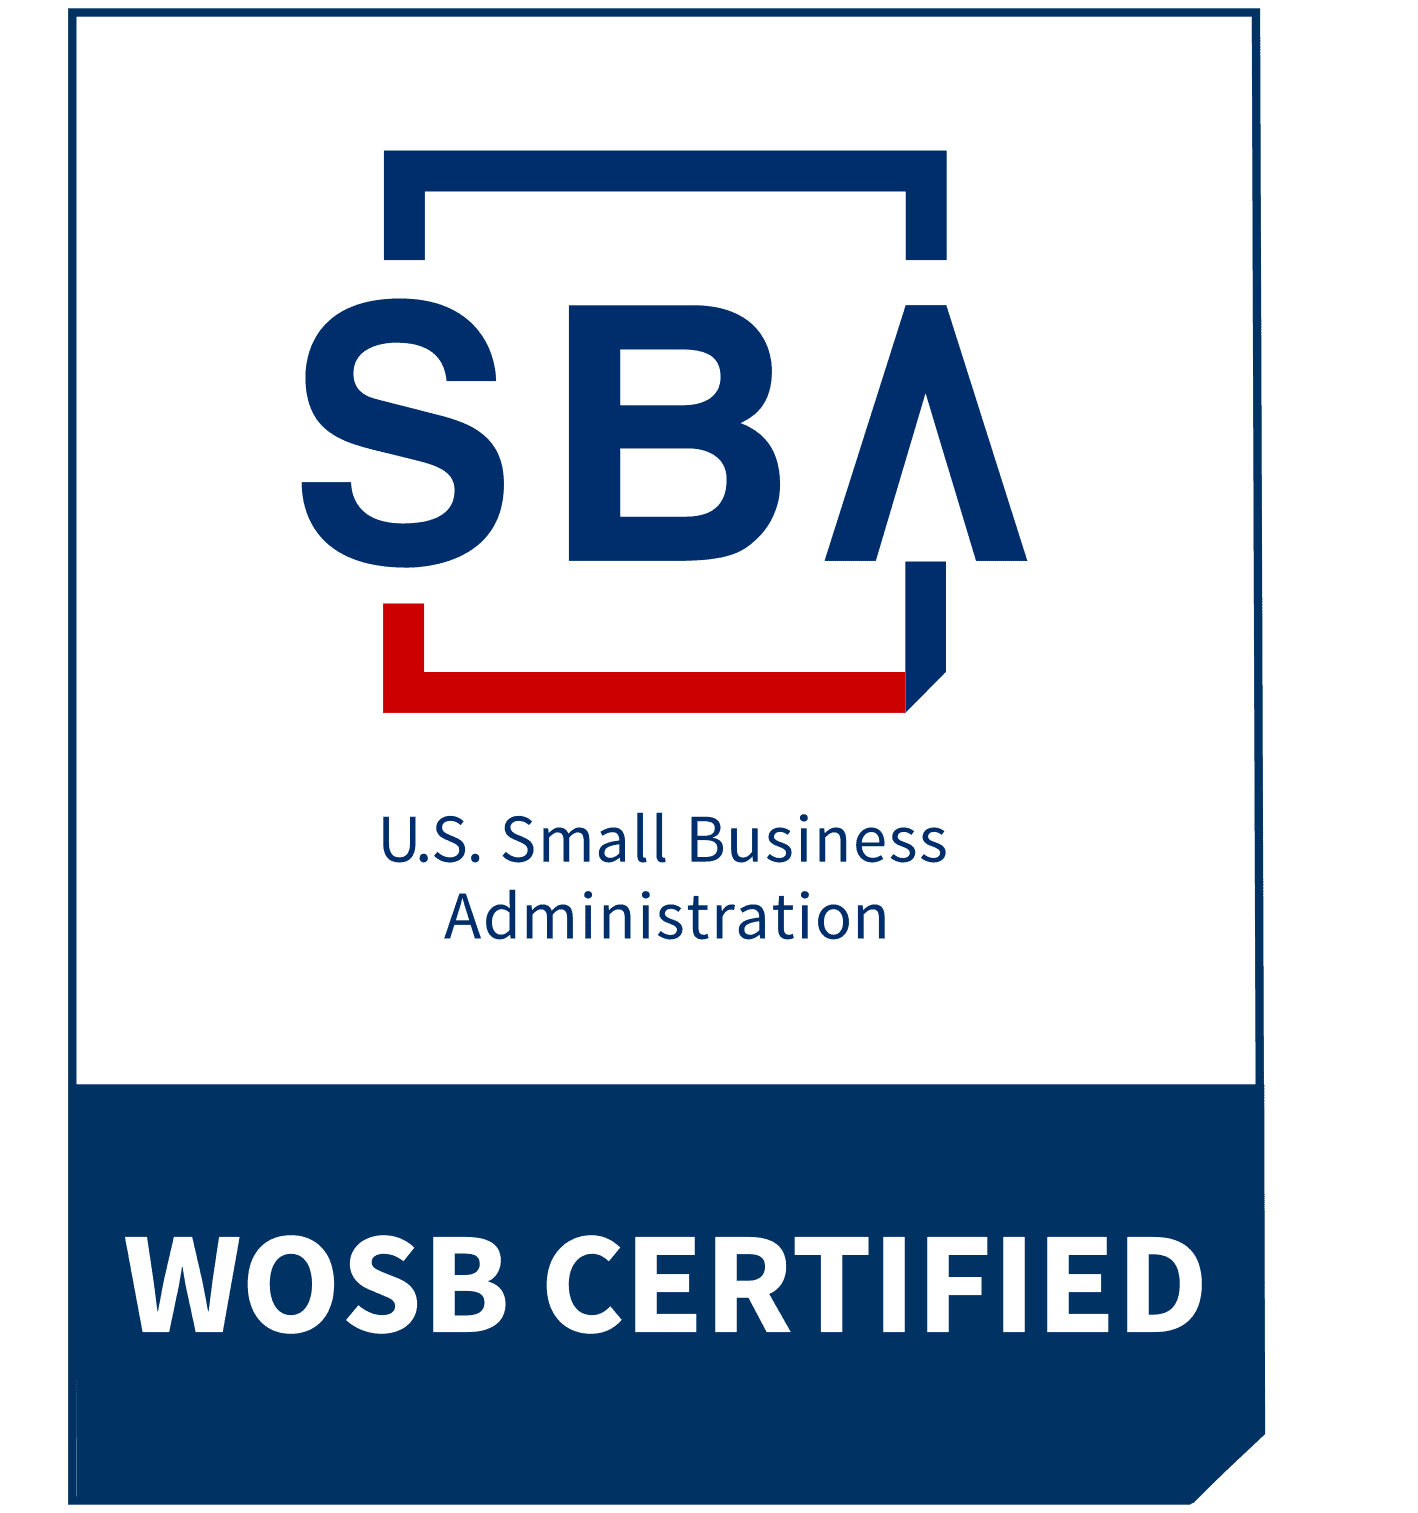 Blue and white SBA WOSB Certified logo